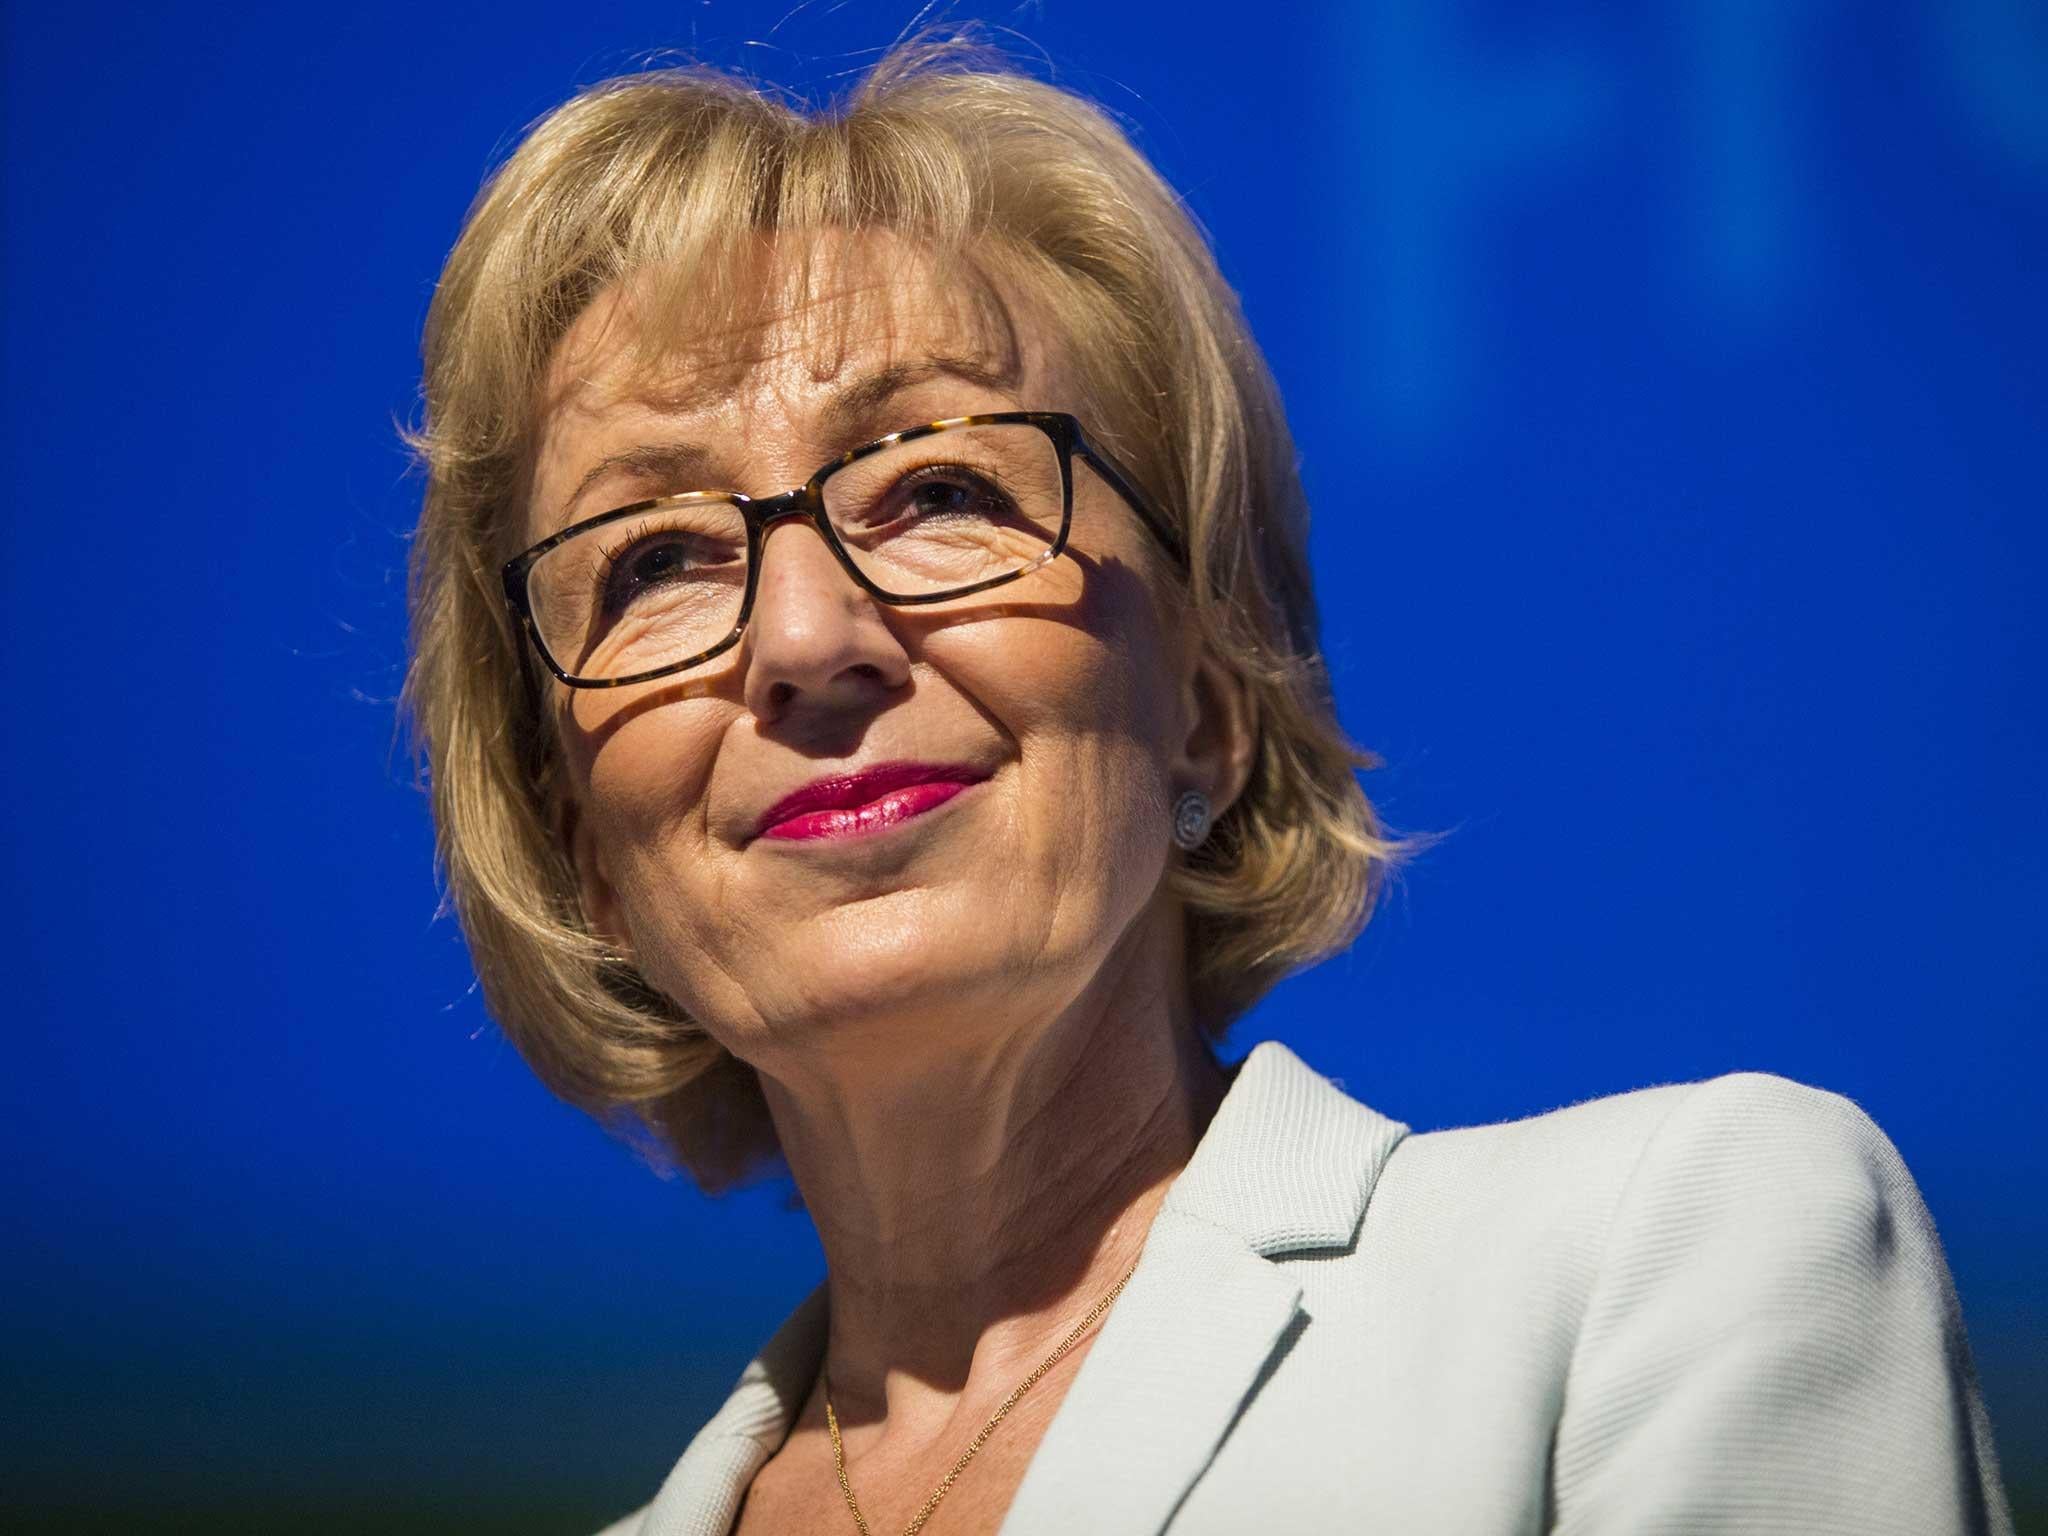 Ms Leadsom came second in Thursday’s Tory leadership vote garnering the support of 84 MPs